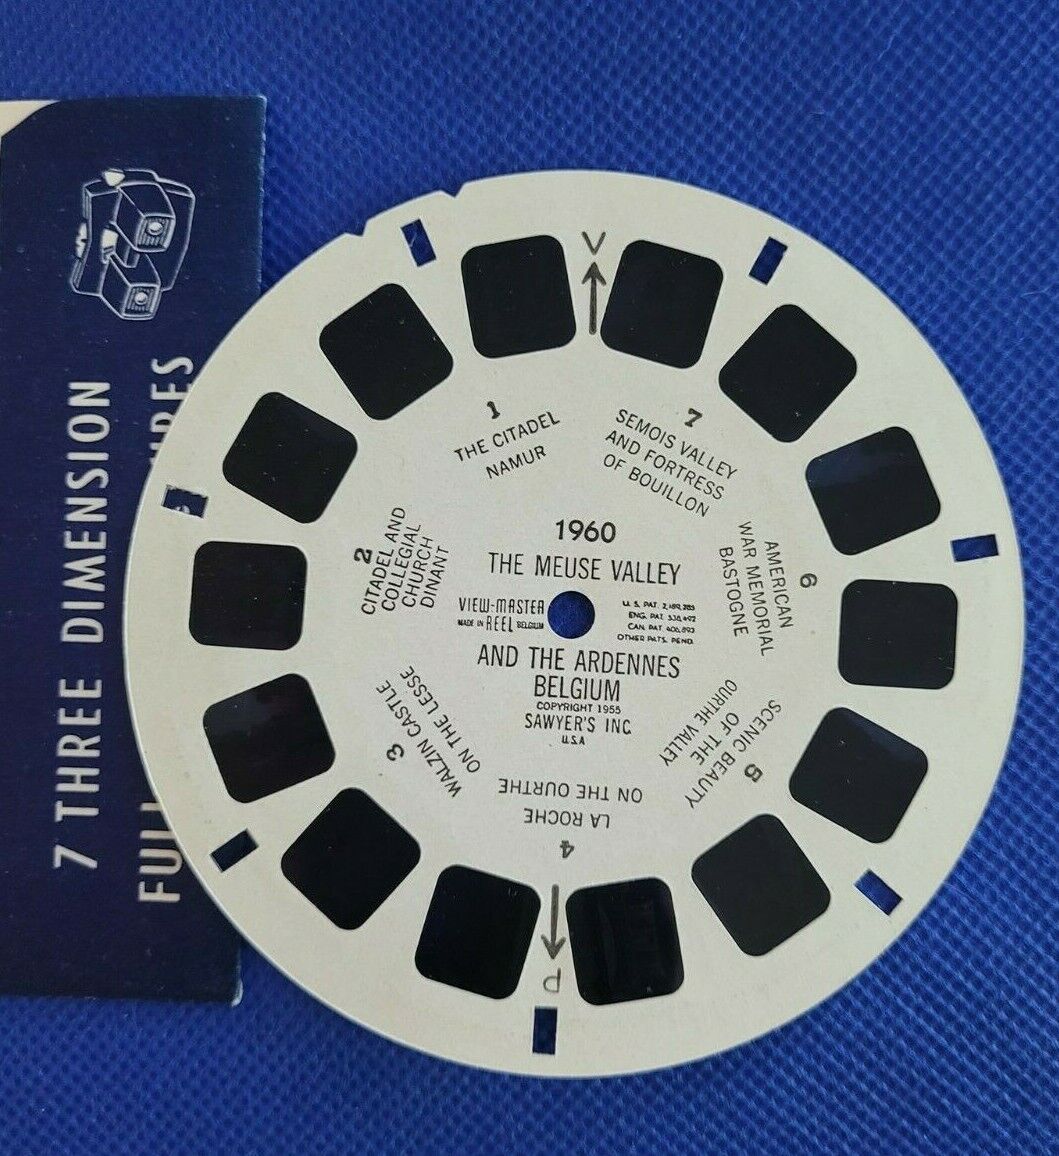 Sawyer\'s Single view-master Reel 1960 The Meuse Valley & the Ardennes Belgium